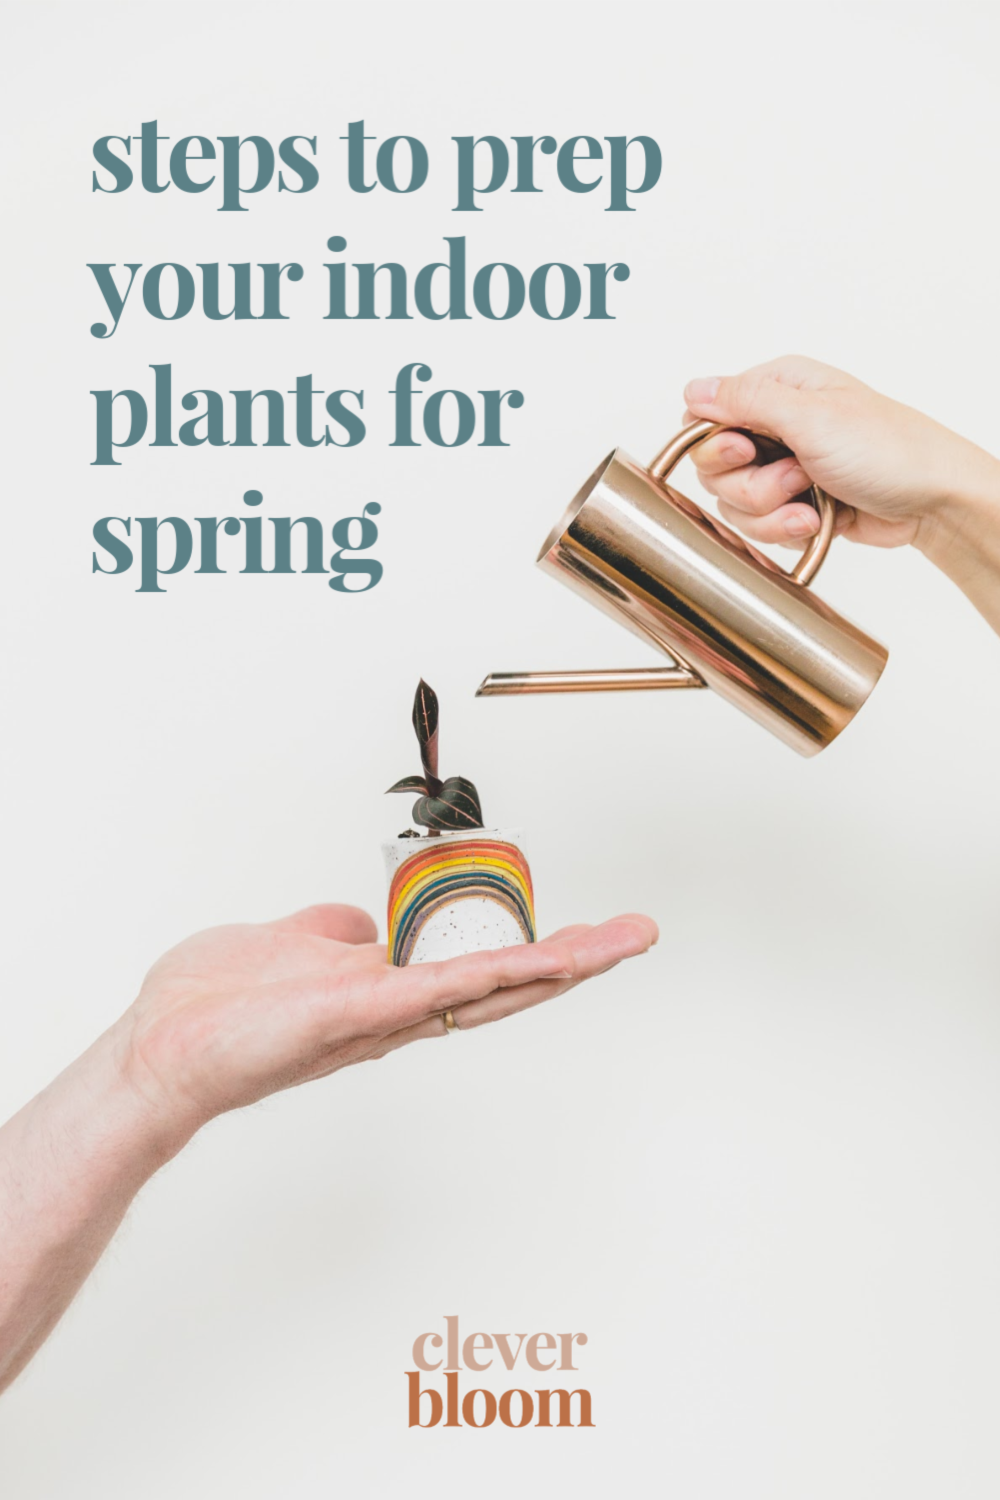 Are you indoor plants ready for Spring? In just 3 easy steps, your houseplants will be prepped and ready to grow big and strong! Clever Bloom #indoorplants #indoorplantcare